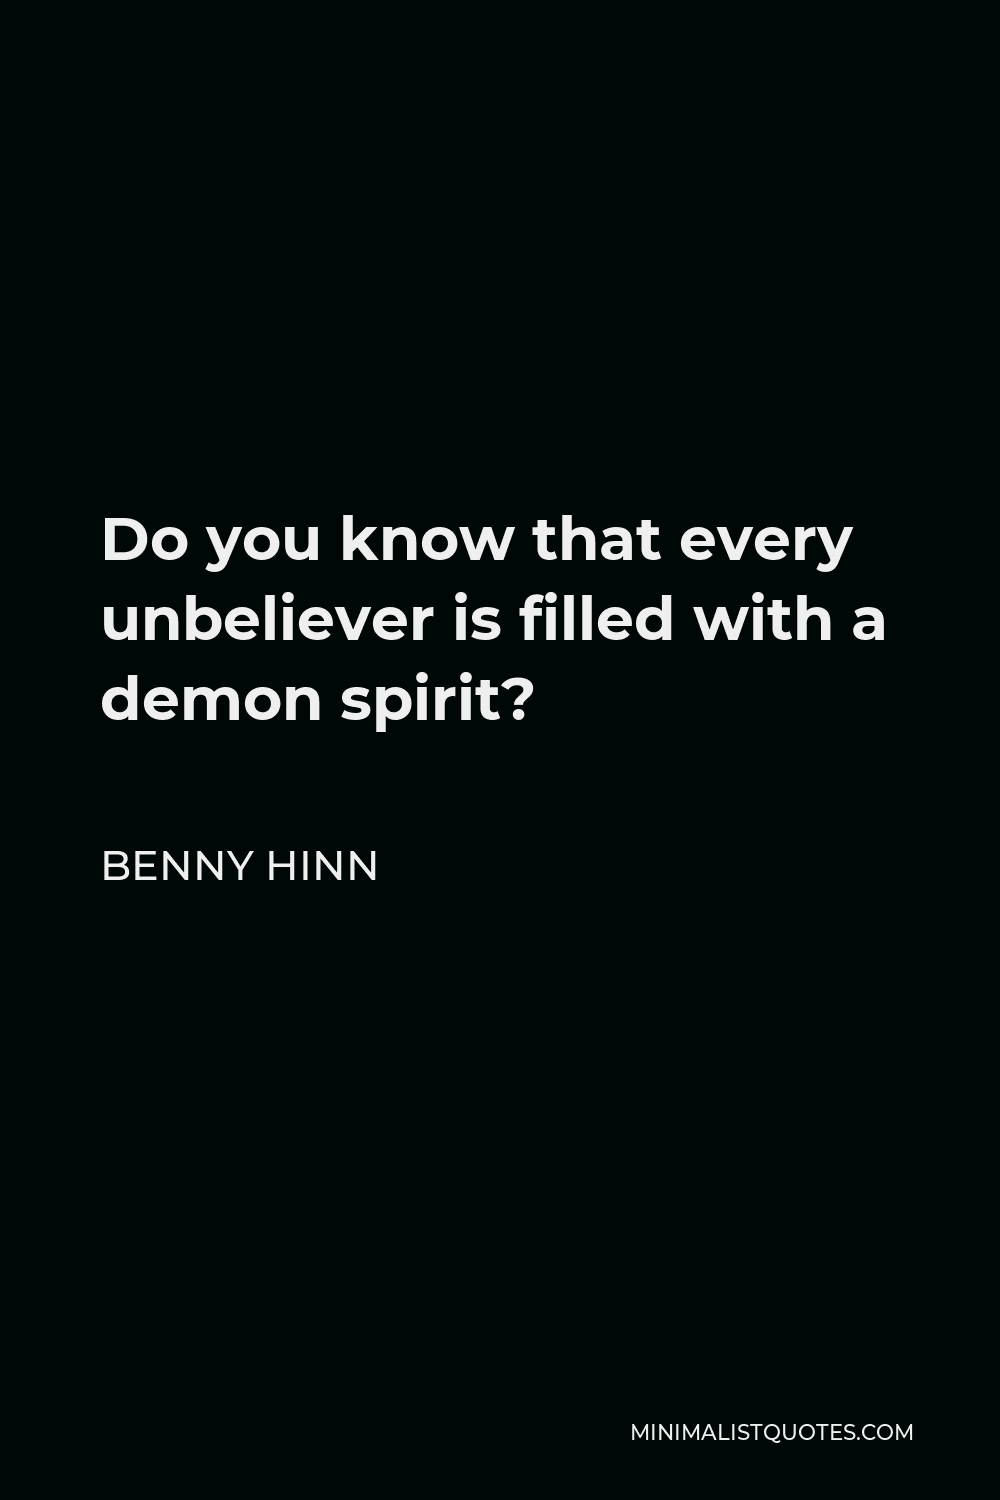 Benny Hinn Quote - Do you know that every unbeliever is filled with a demon spirit?